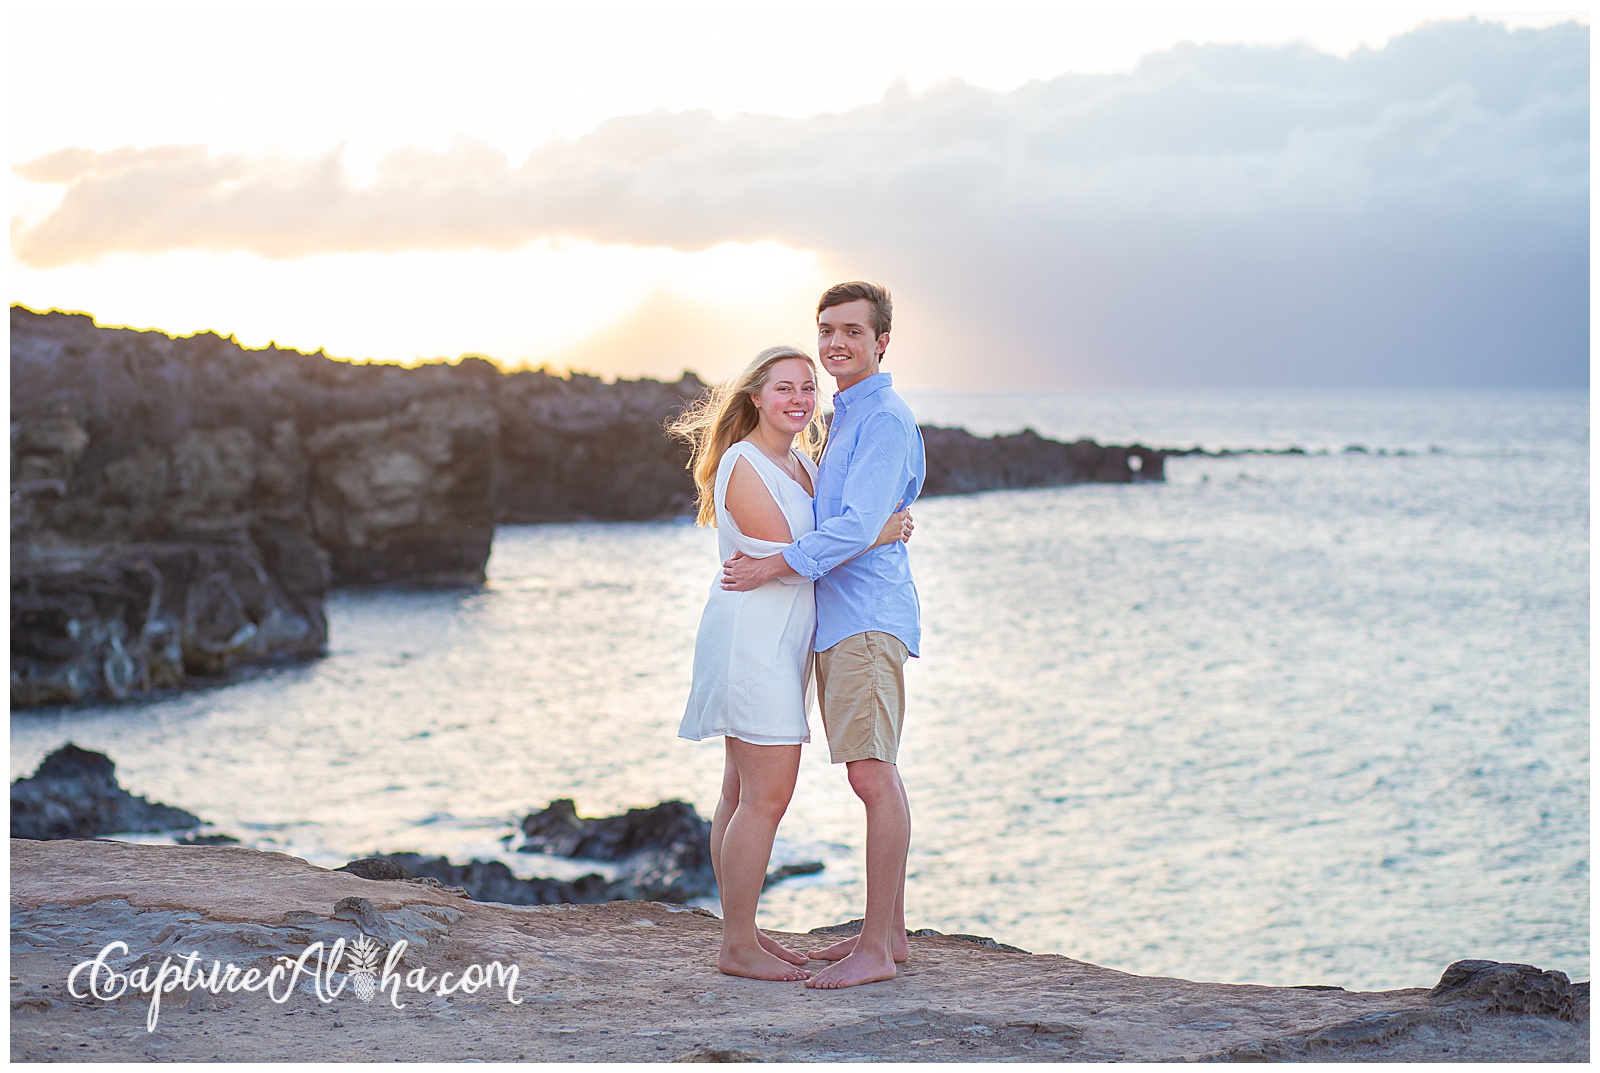 Surprise Proposal Photography on Maui at Ironwoods Beach at Sunset